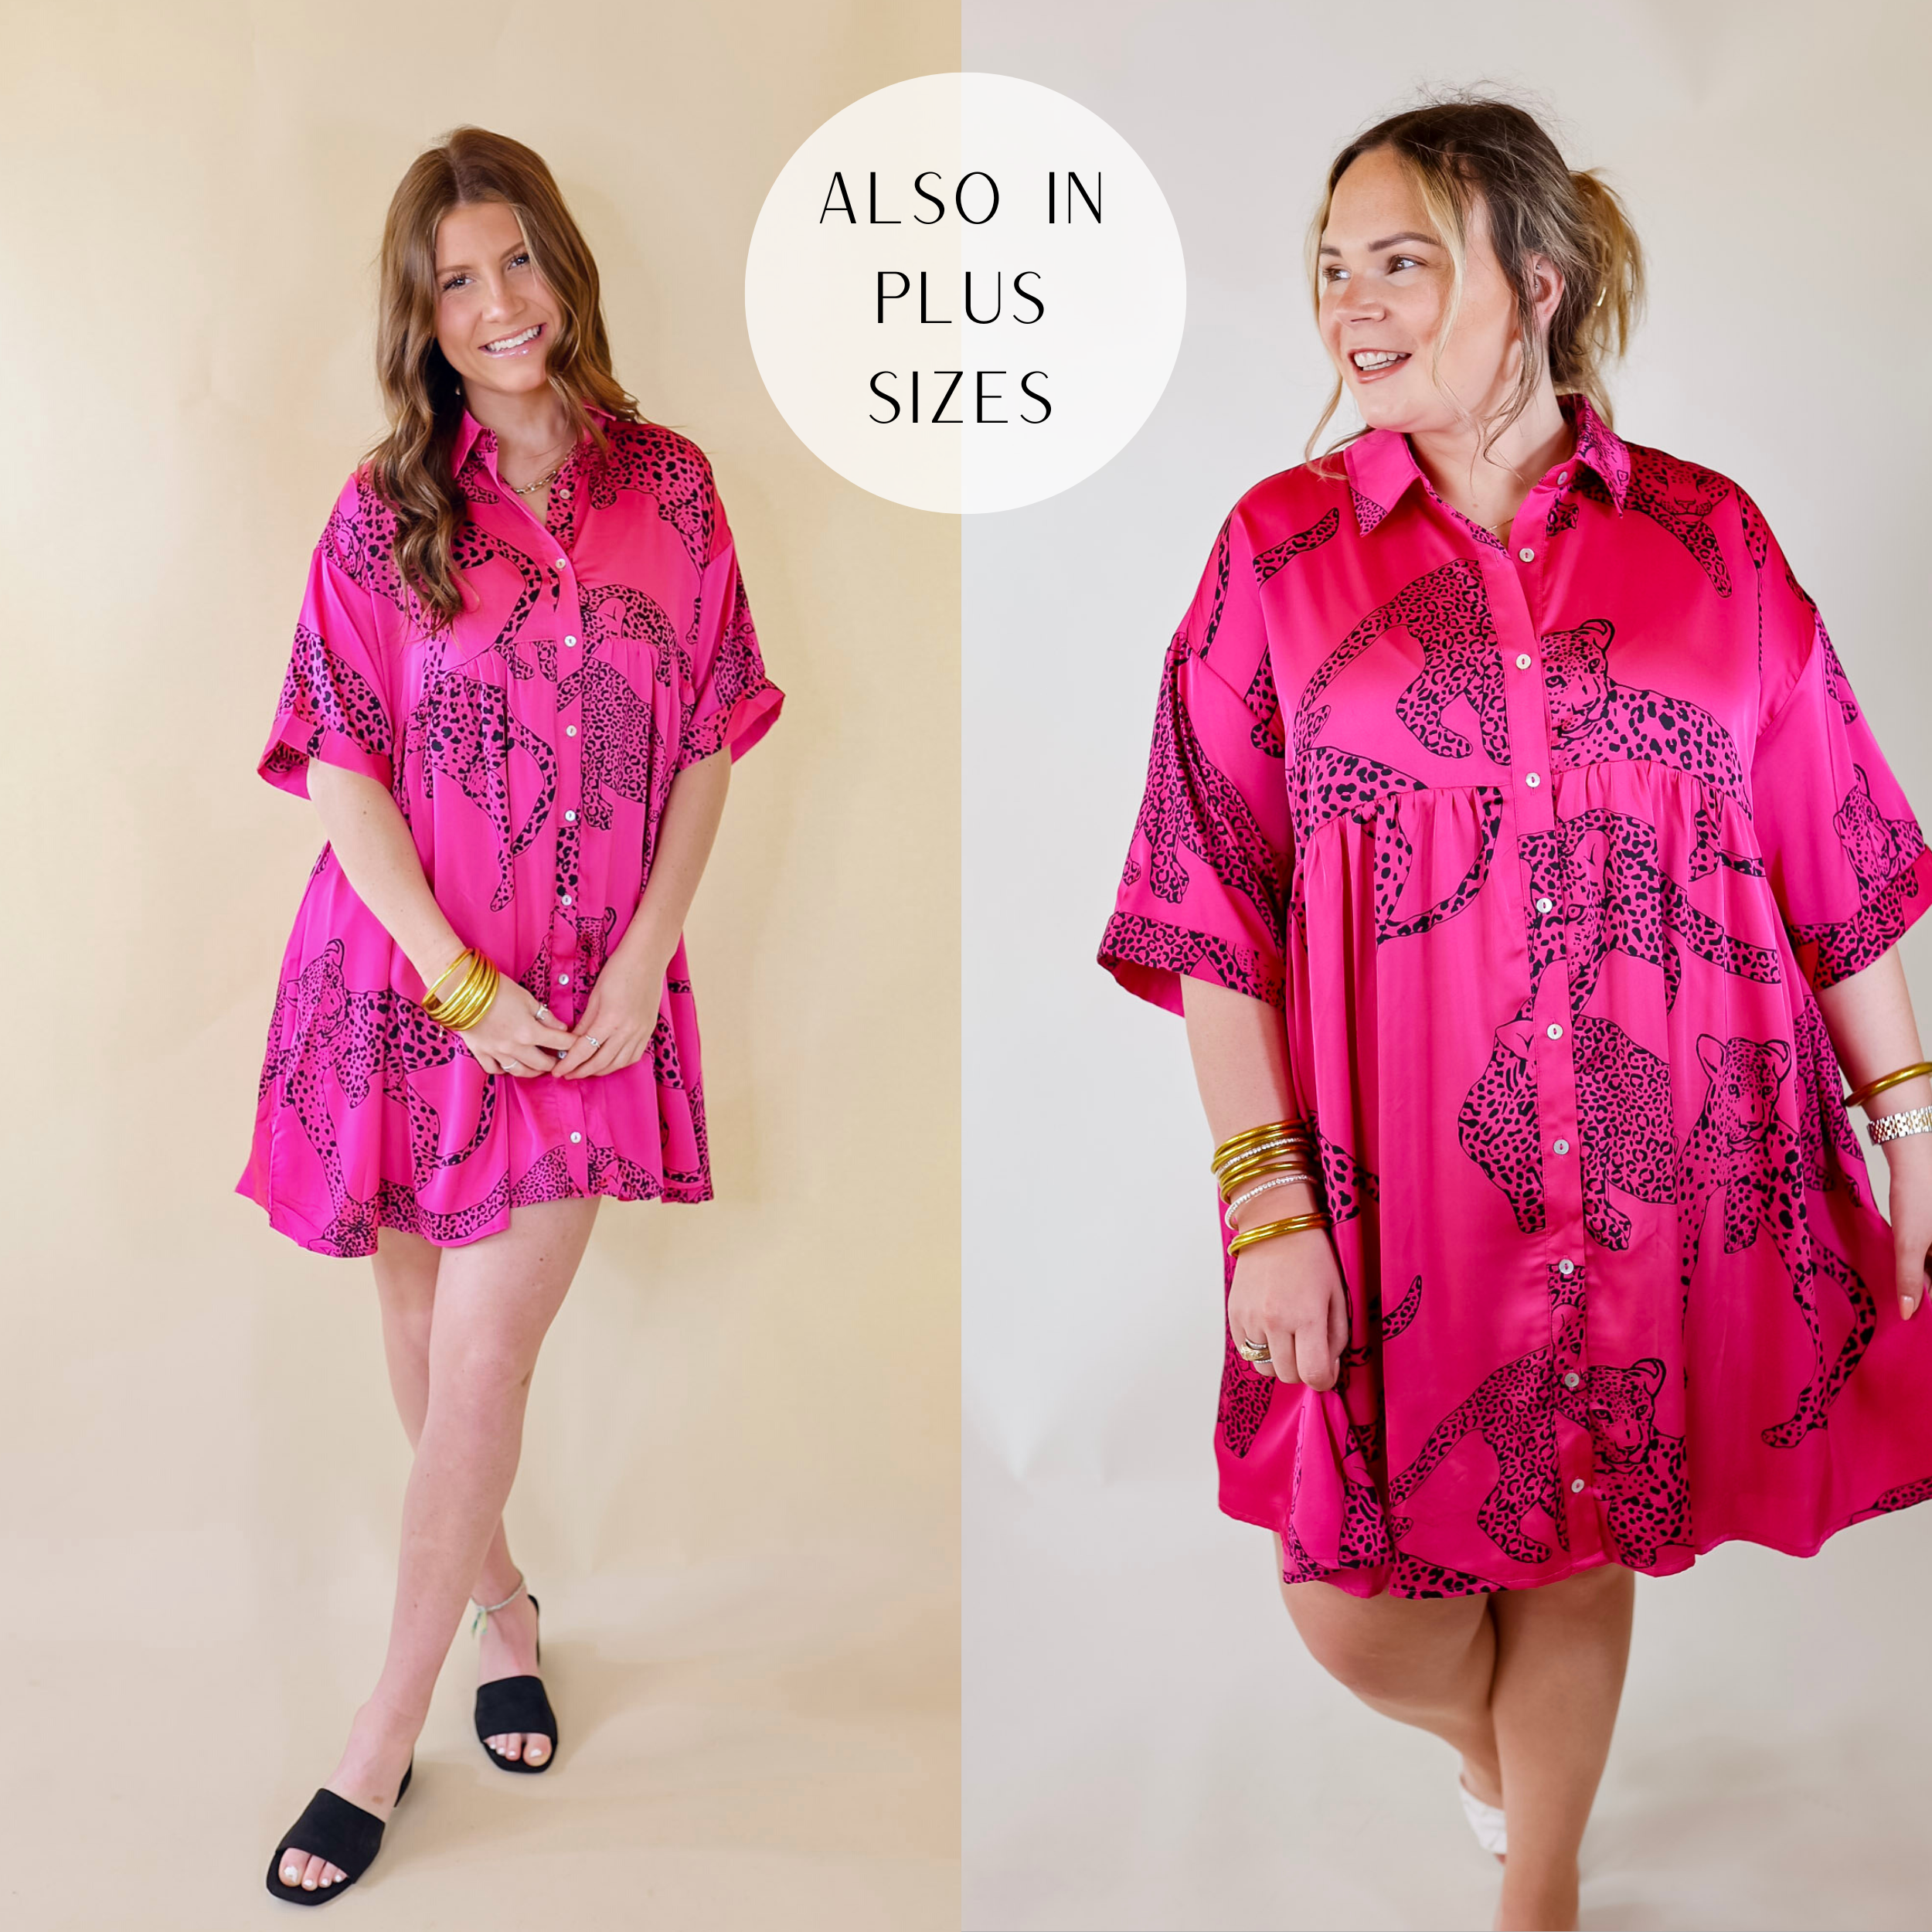 A short satin pink button up dress featuring black leopards, button up collar, and a loose flowy fit. Item is pictured on a pale pink background.